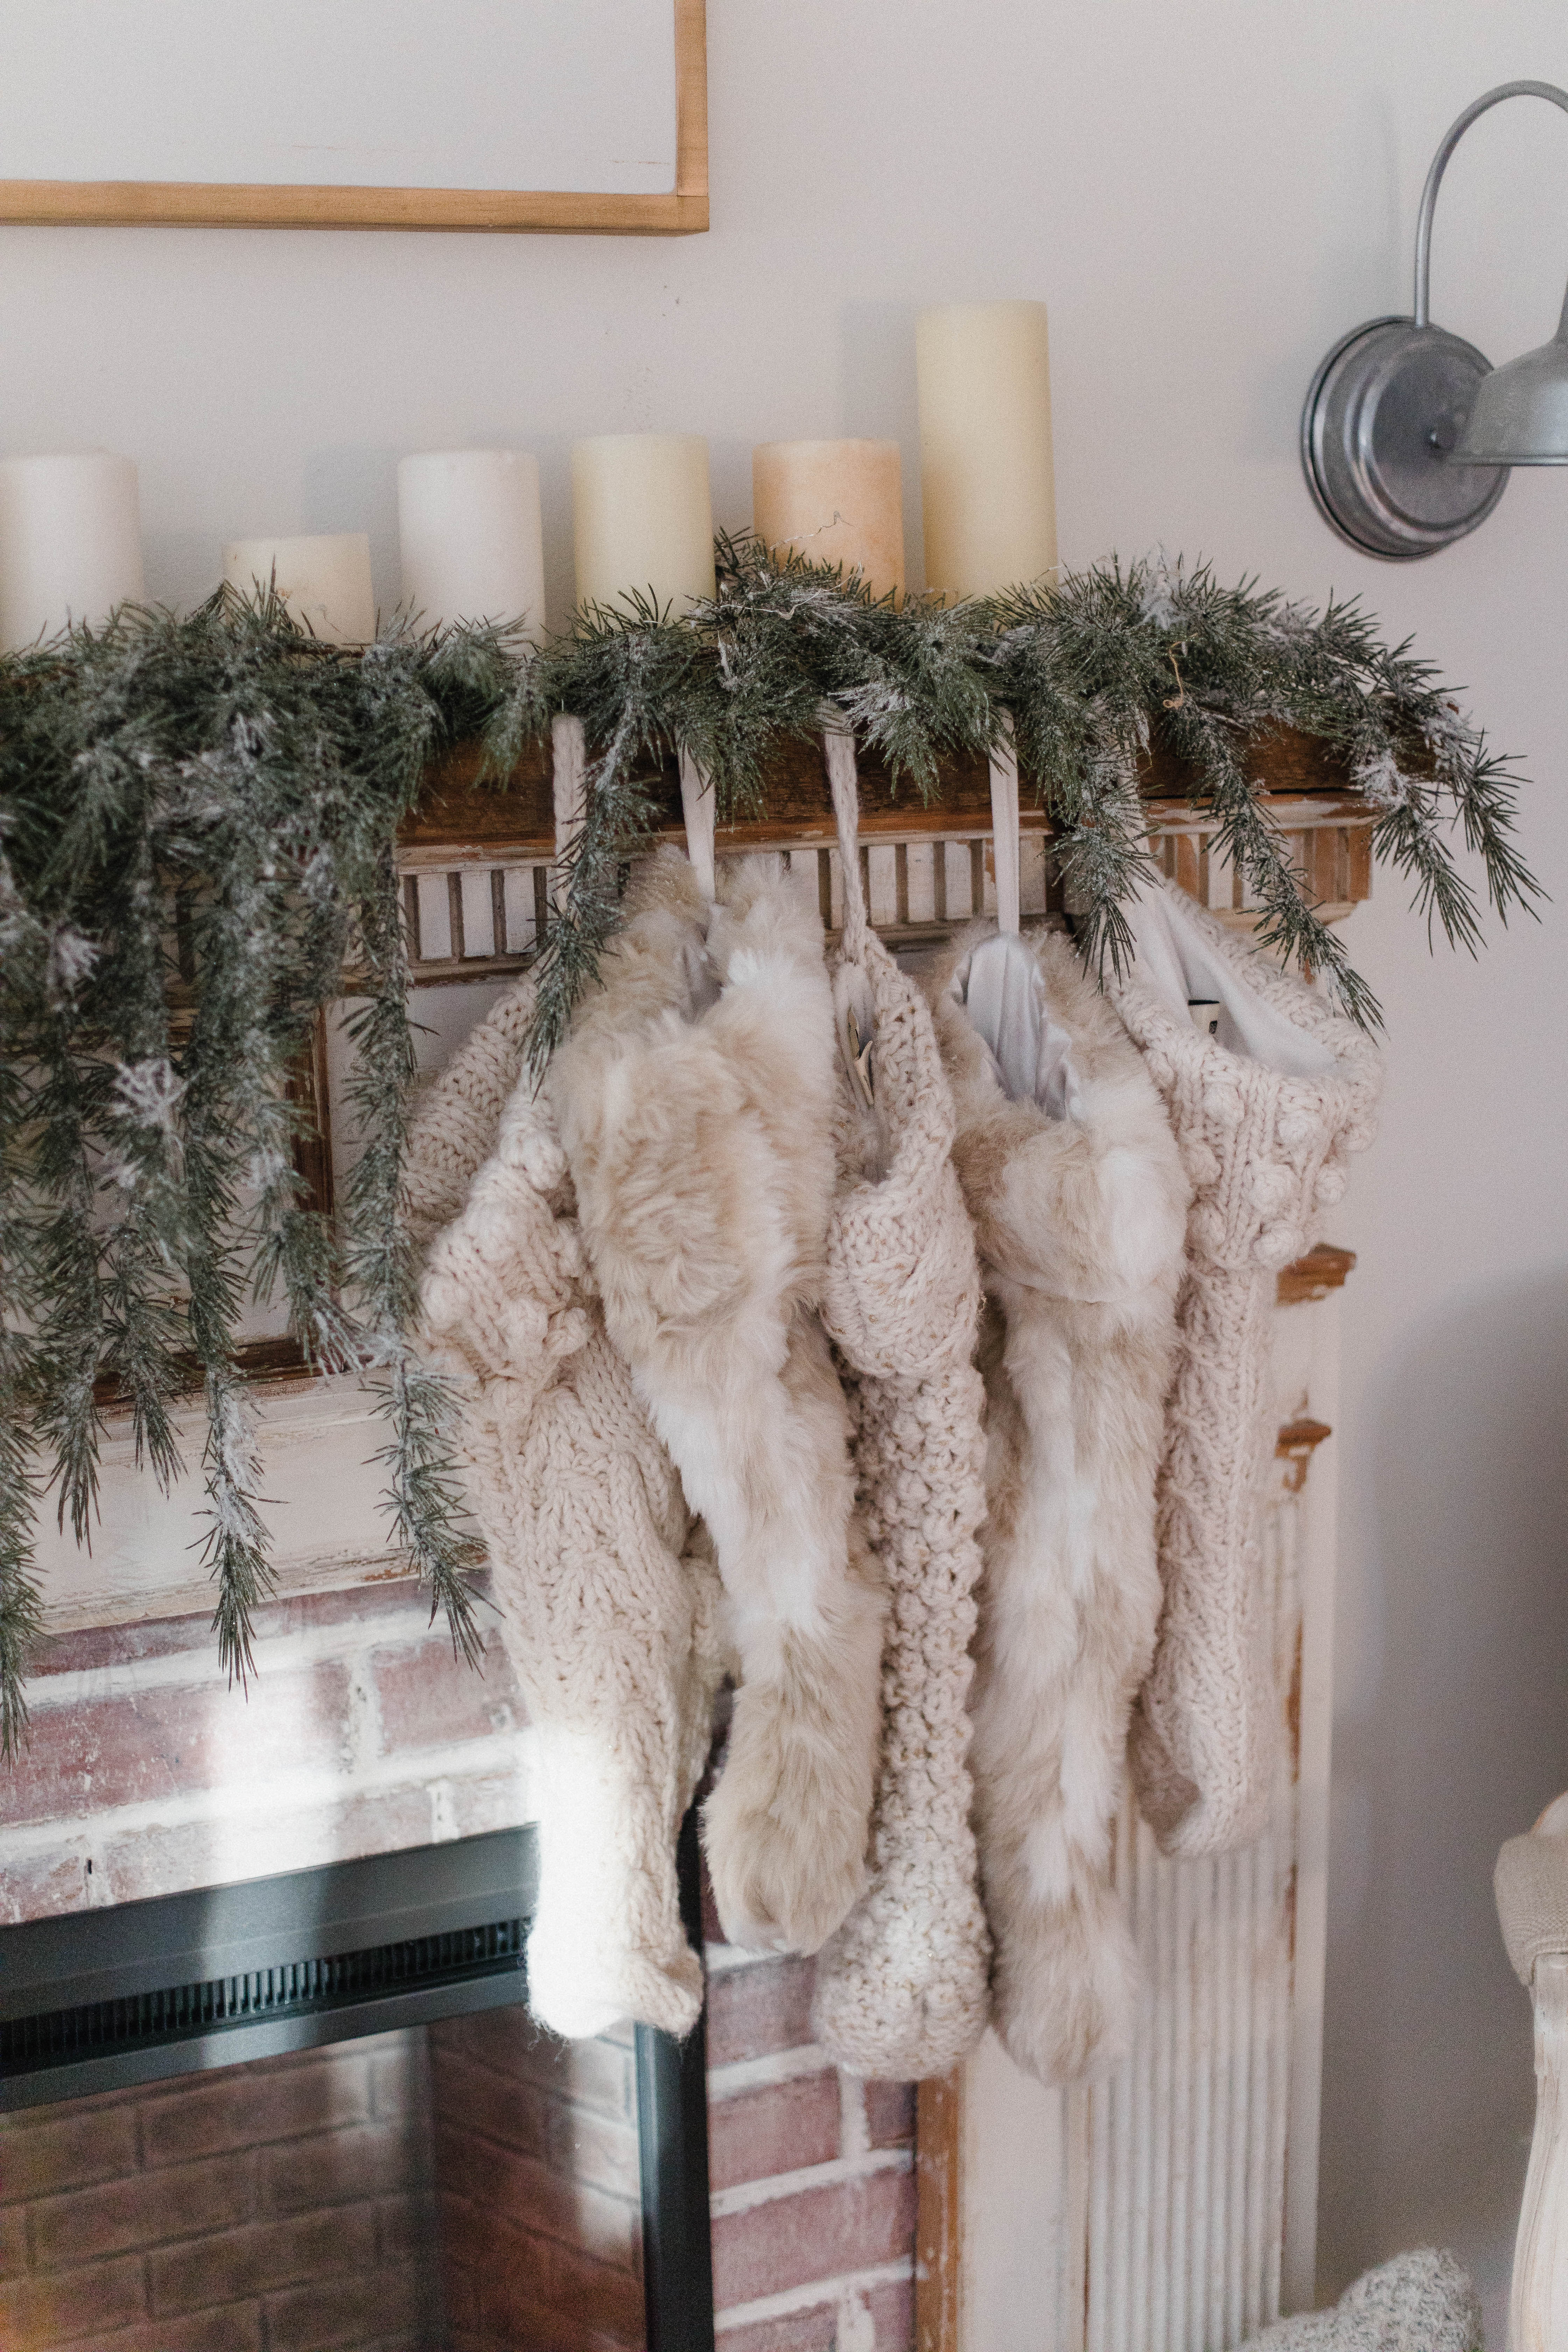 Connecticut life and style blogger Lauren McBride shares her Christmas Cottage Living Room for the 2018 Christmas season.